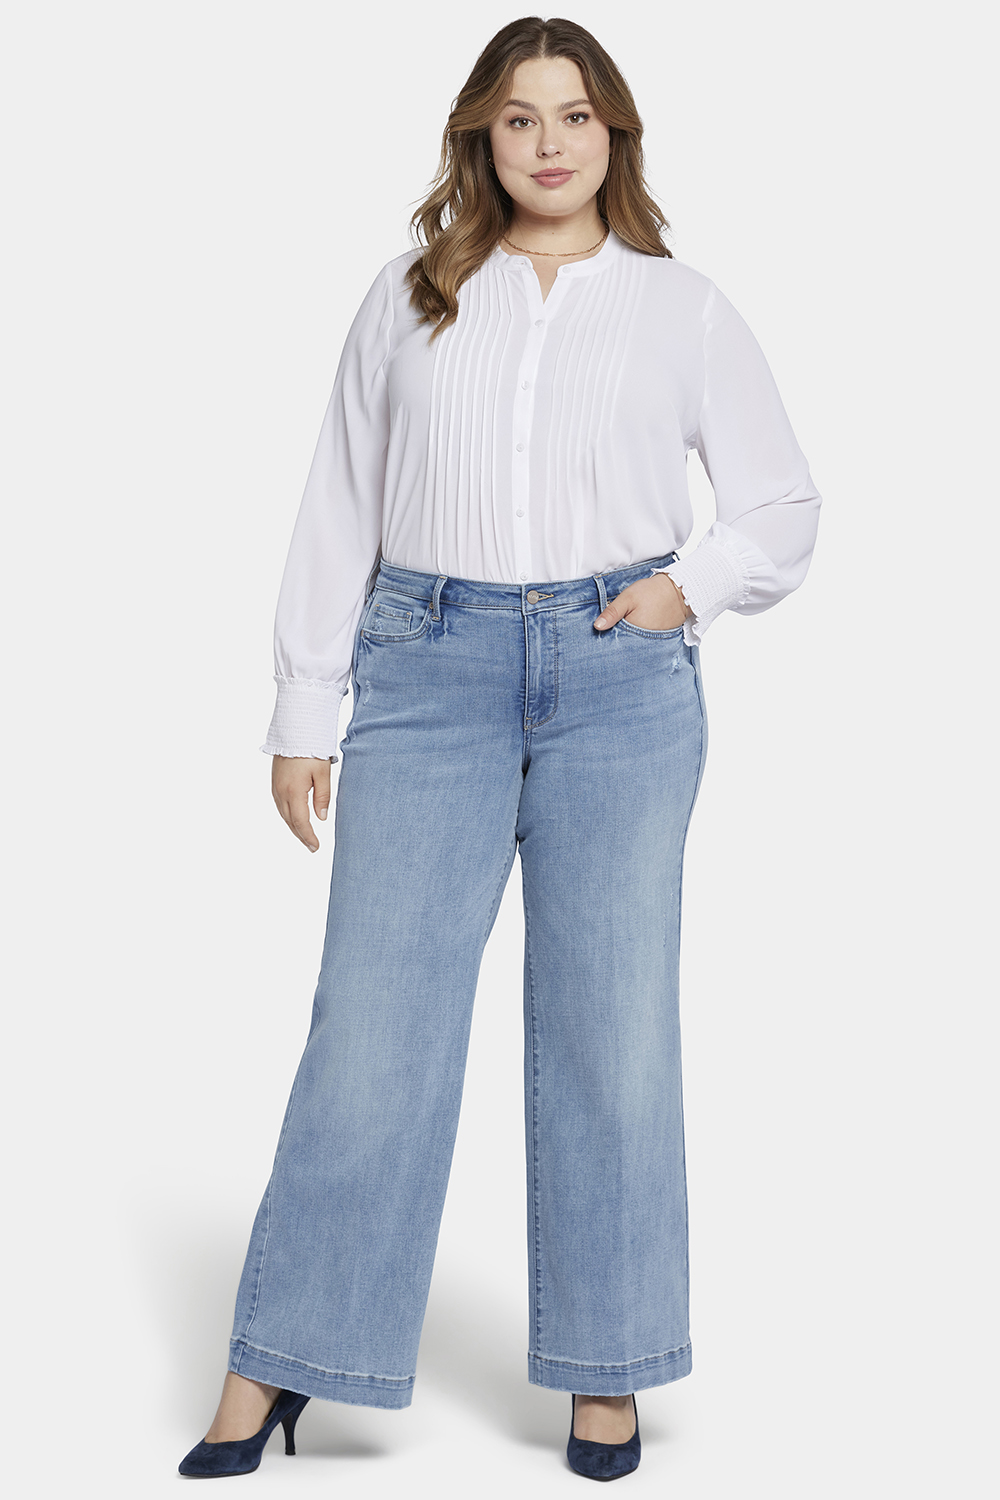 Buy Highly Desirable High Rise Trouser Leg Jeans Plus Size for USD 88.00 |  Silver Jeans US New